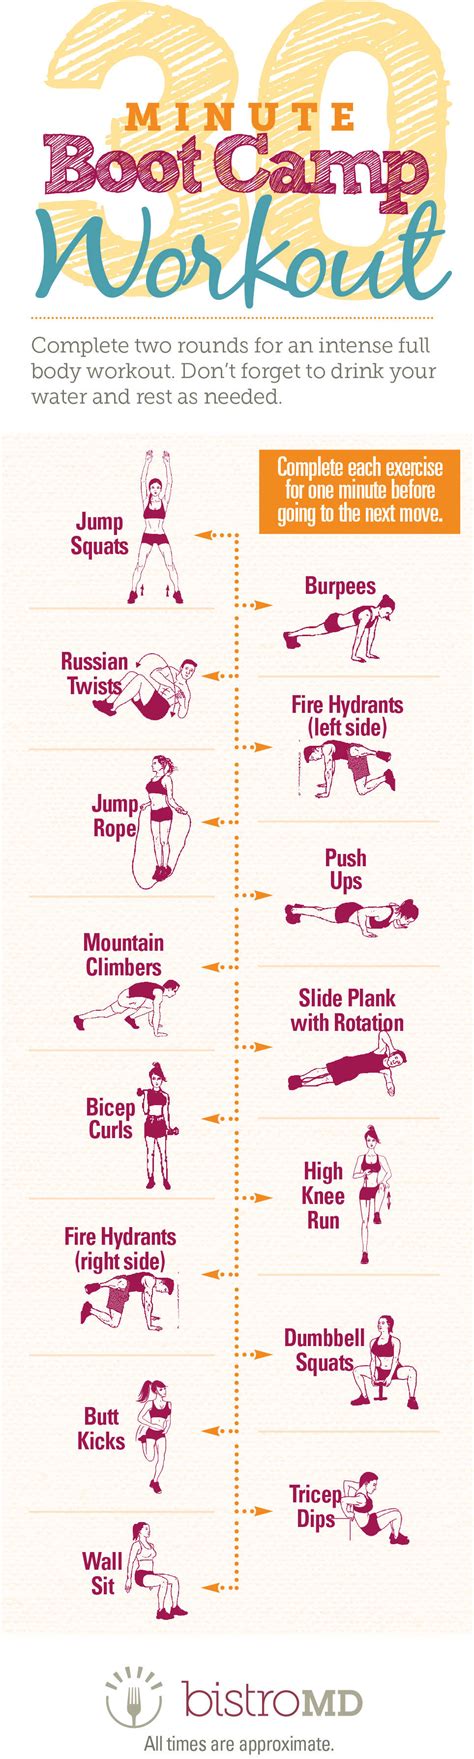 30 Minute Boot Camp Workout Pictures, Photos, and Images for Facebook ...